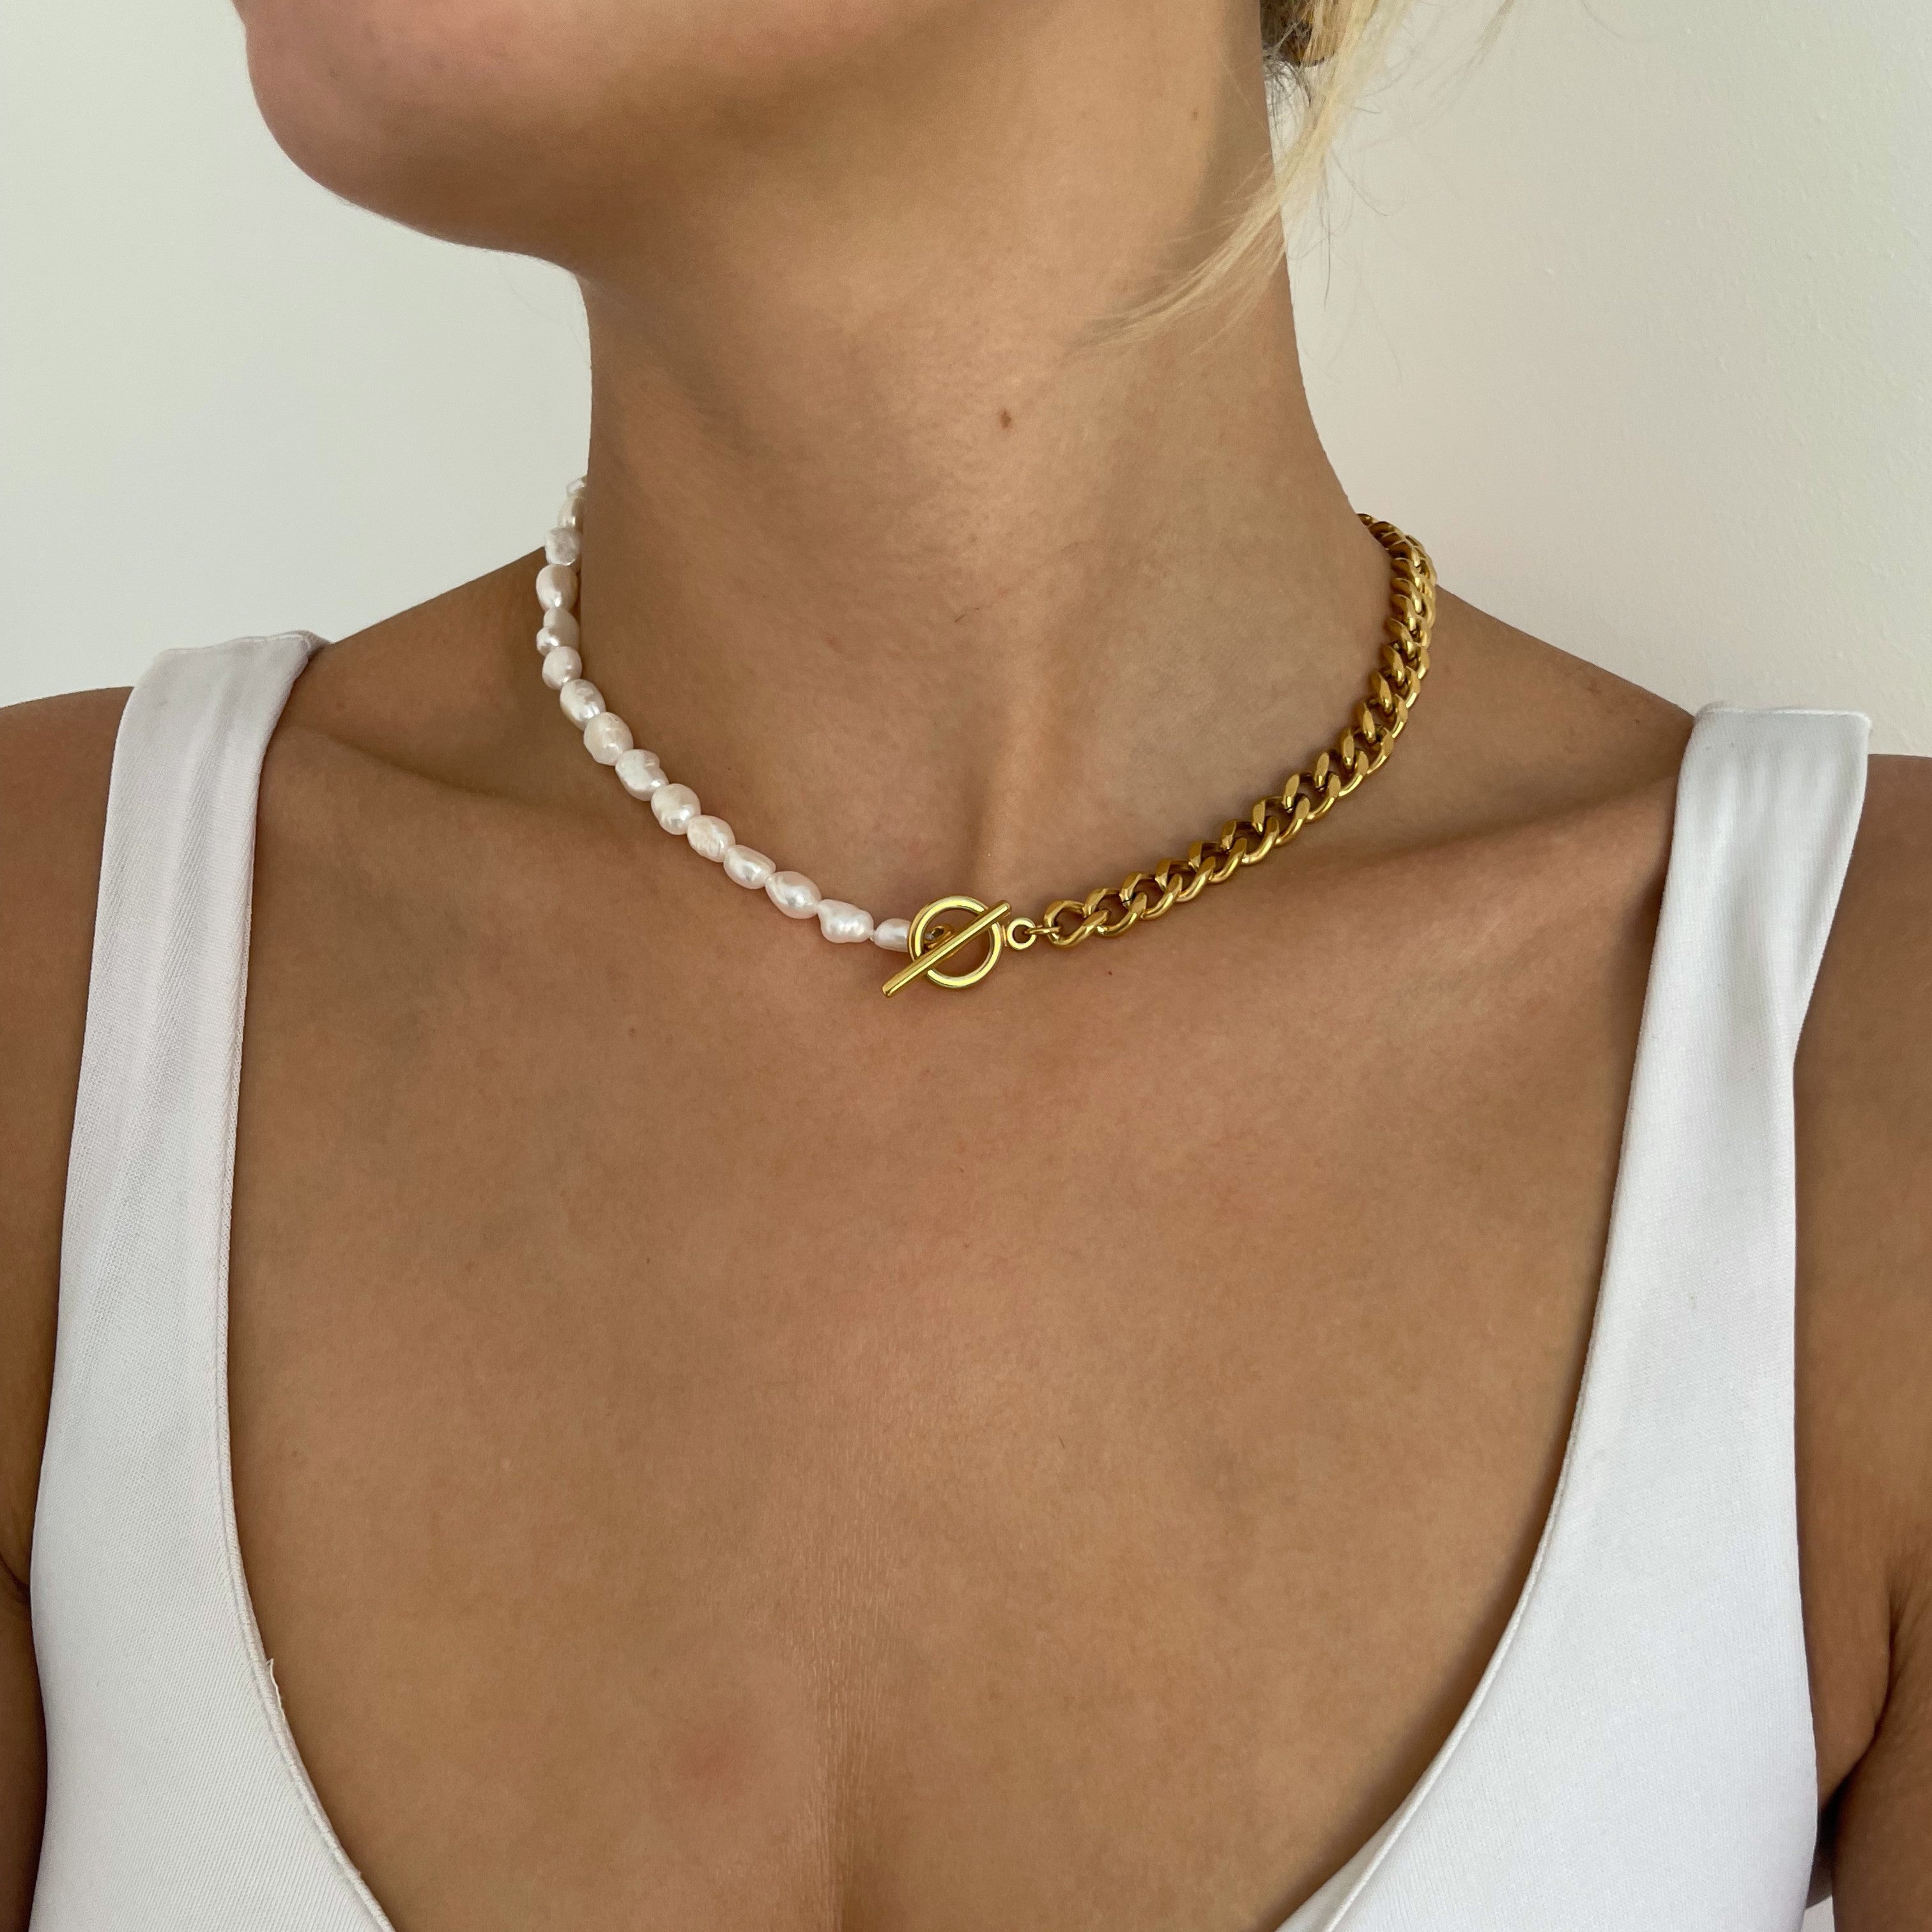 Chain Necklace with Pearls: Make a statement with this chic gold pearl necklace